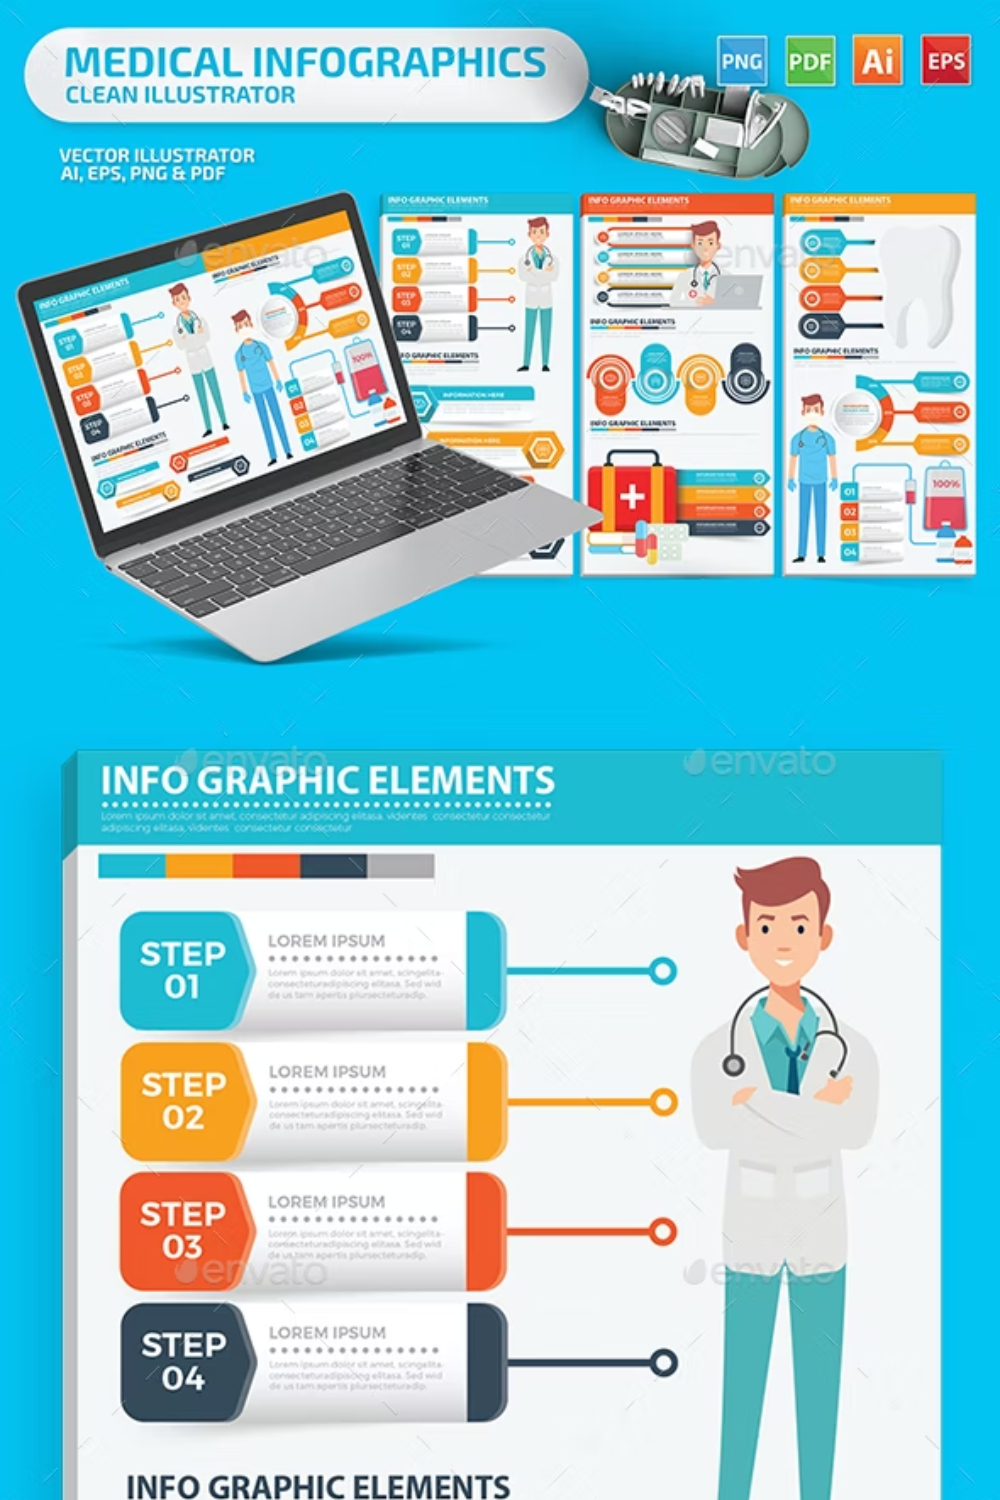 Medical Infographics Pinterest Cover.